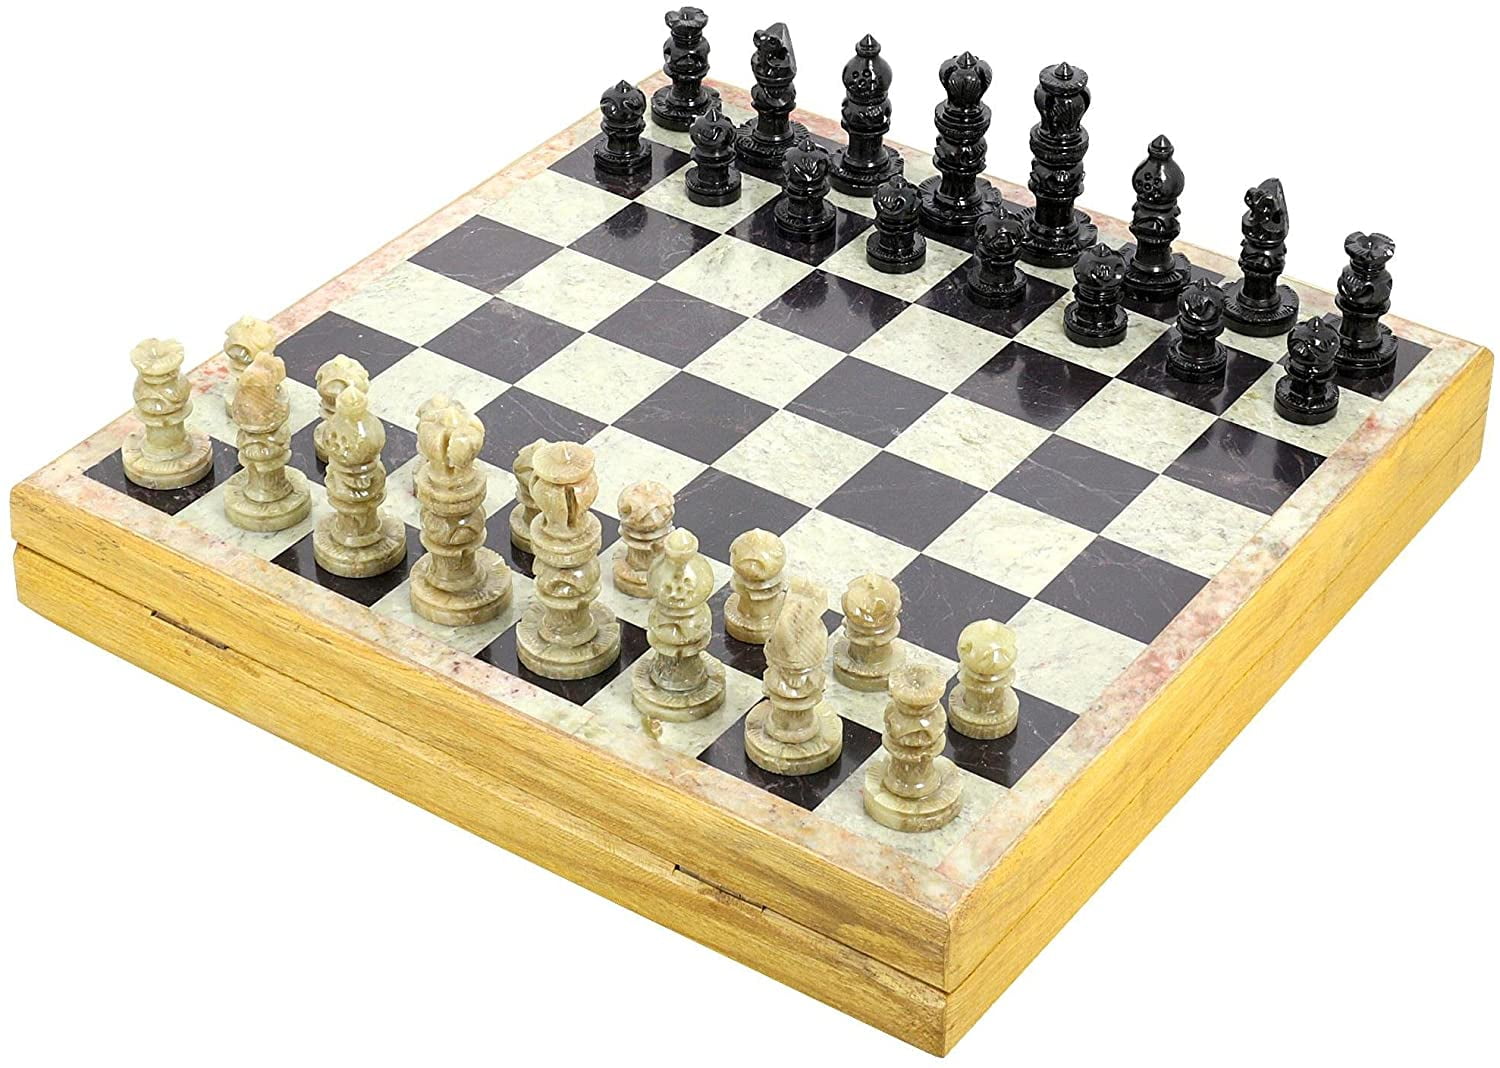 Ajuny Crafted Stone Art Chess Set Hand Carved Stone Pieces Board